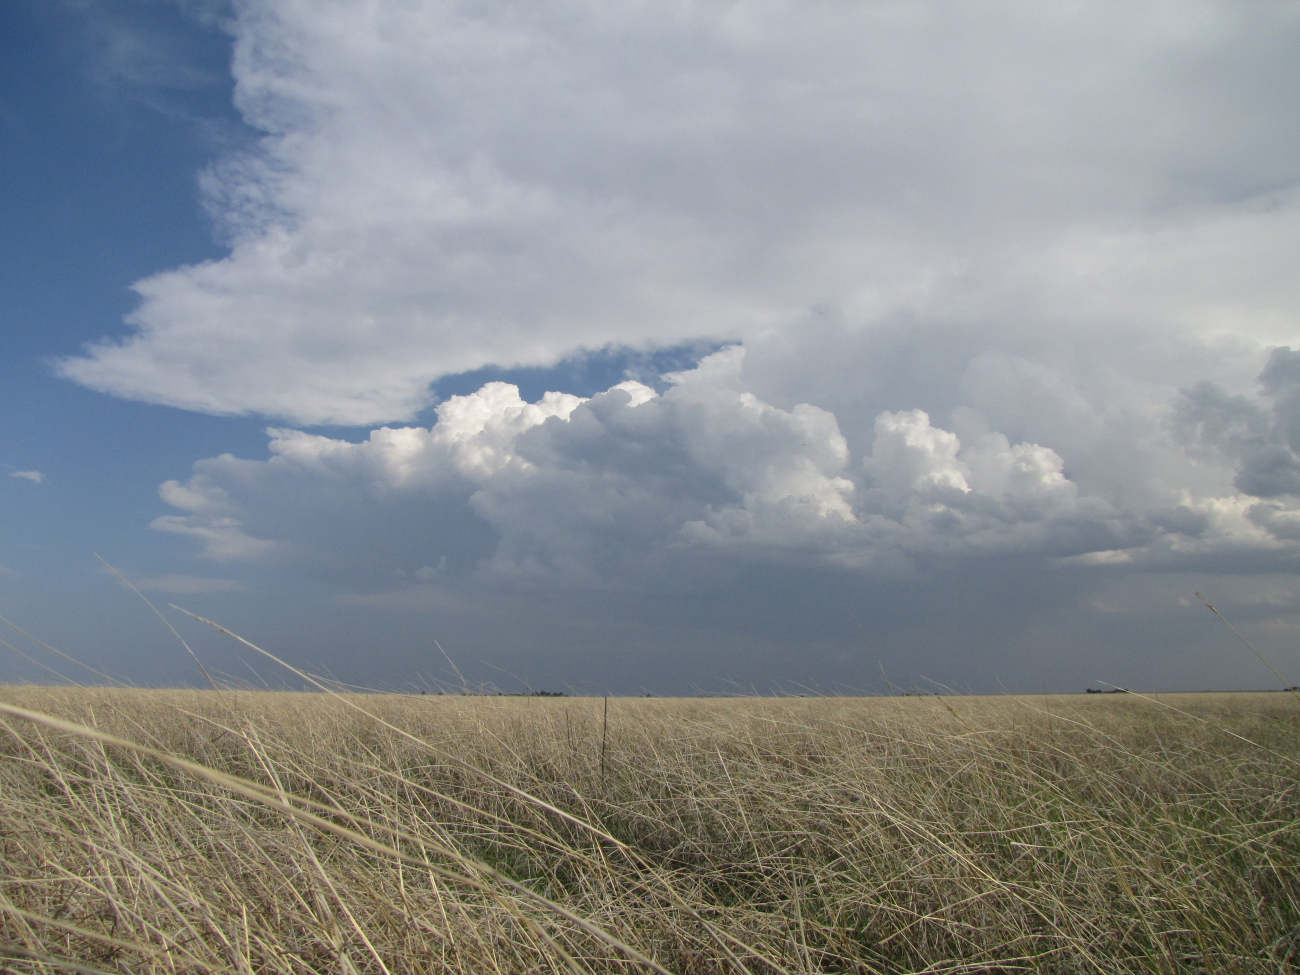 A thunderstorm in the Texas Panhandle